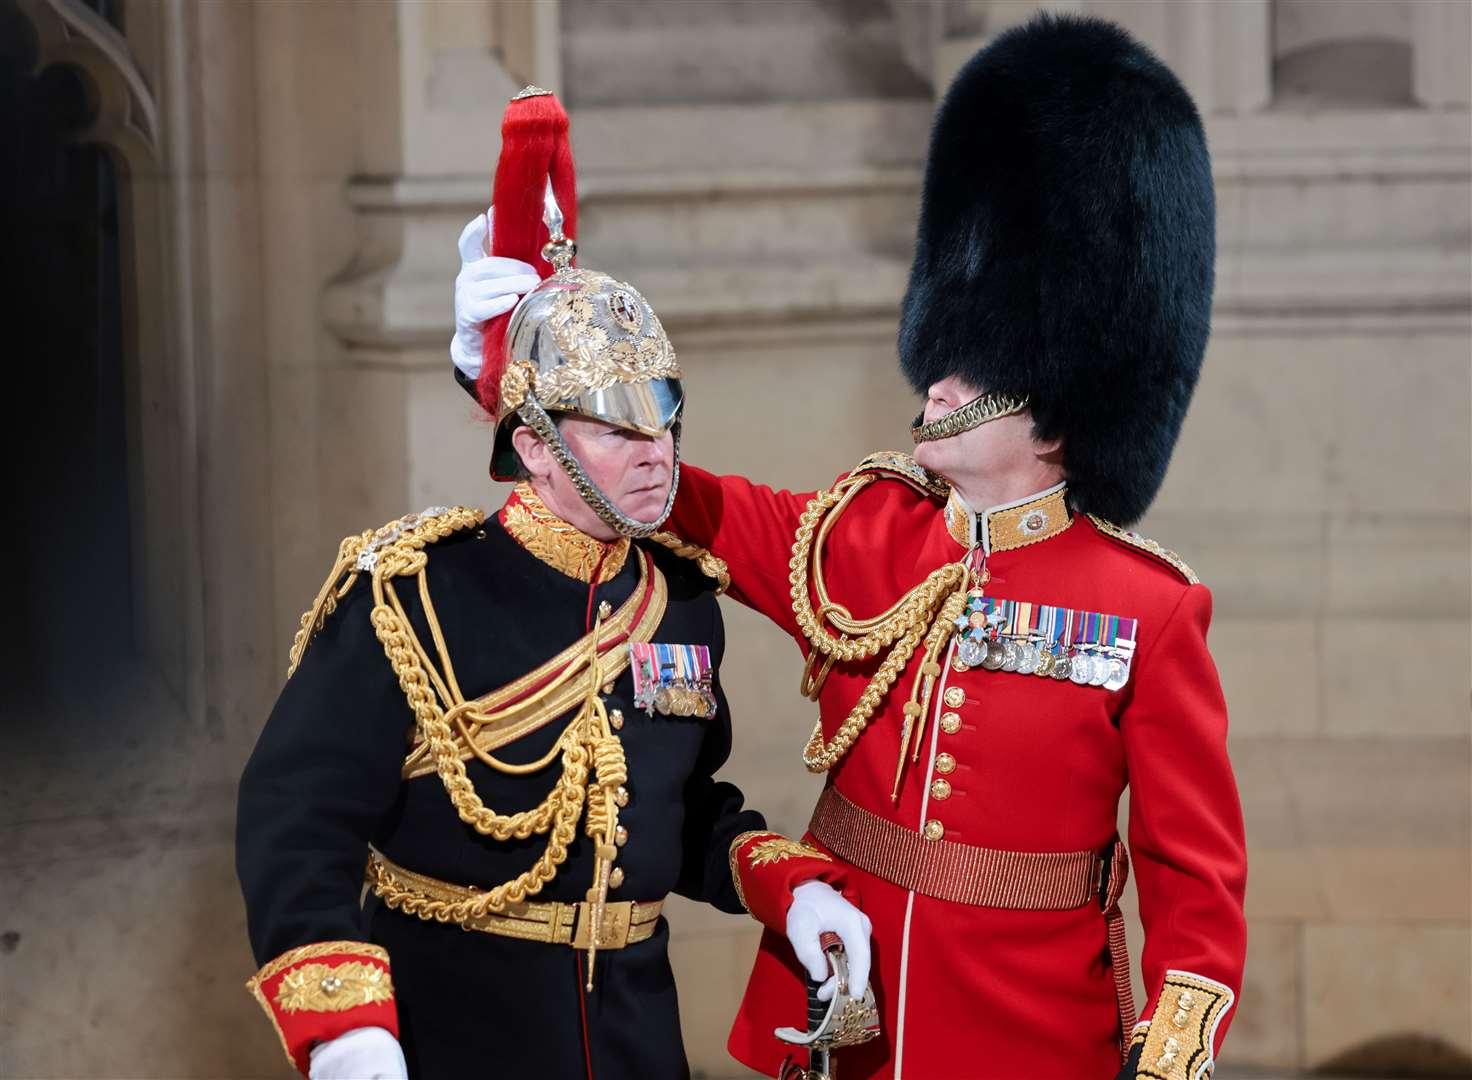 Members of the Household Cavalry at the Sovereign’s Entrance to the Palace of Westminster ahead of the State Opening of Parliament in the House of Lords (Chris Jackson/PA)